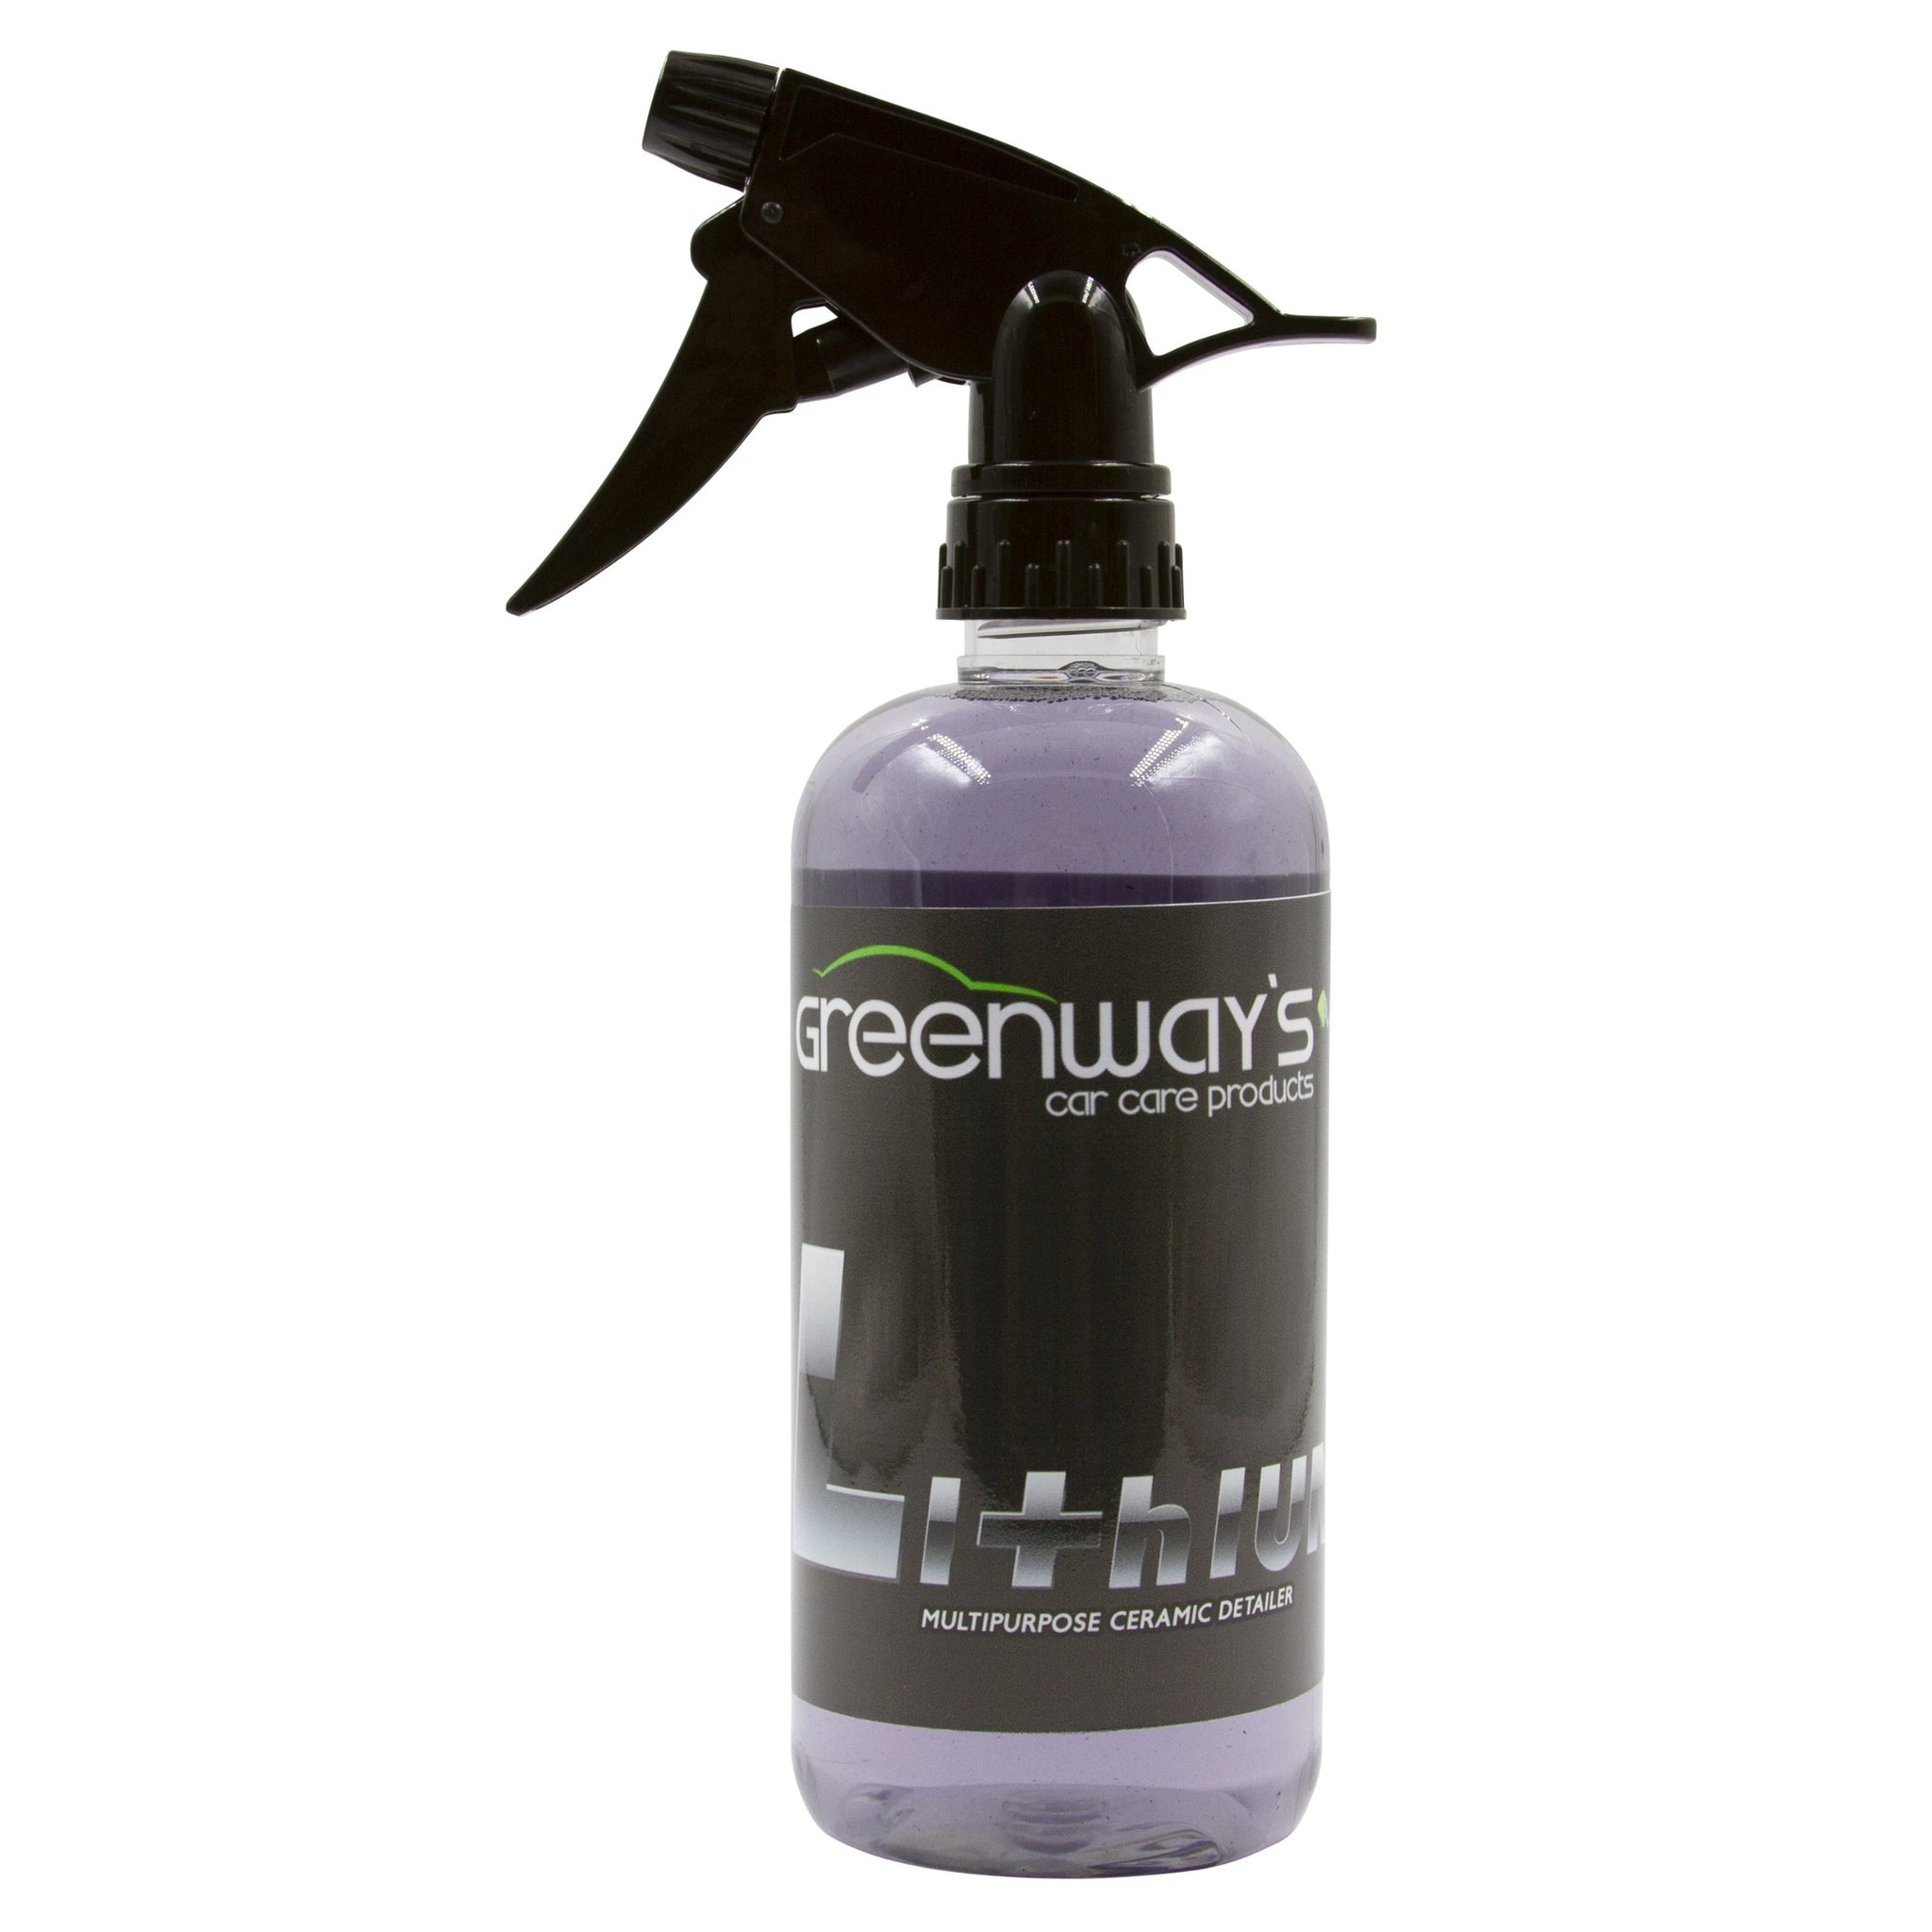 Greenway’s Lithium, graphene ceramic coating car sealant spray, extends current coating for enhanced protection, 16 ounces.